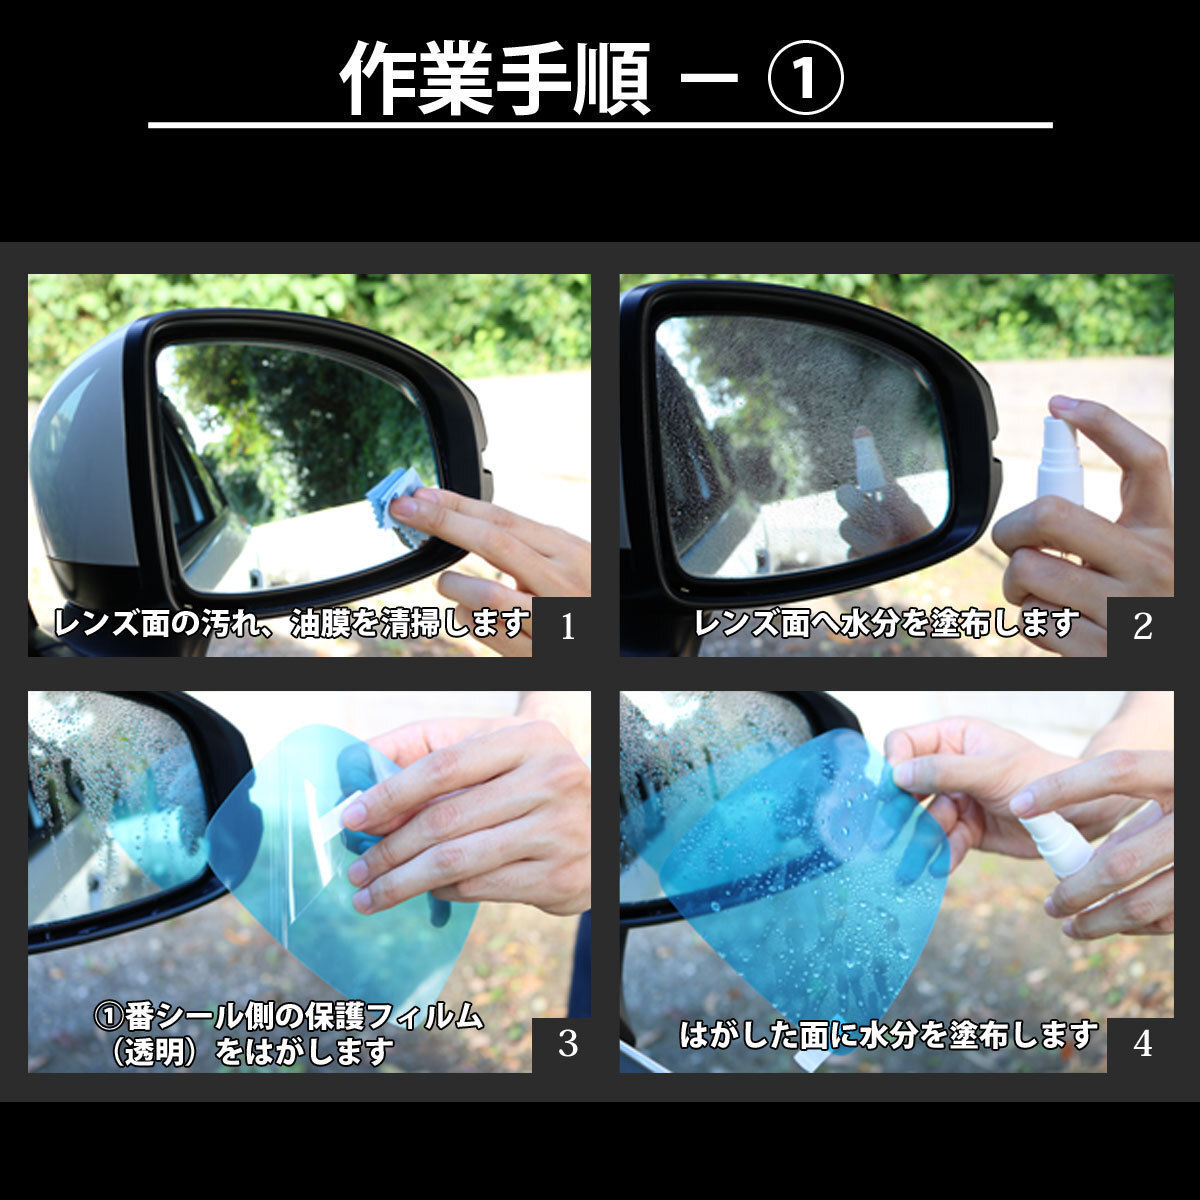  postage 185 jpy car make exclusive use VW Sharan 7NC Tiguan 5N series exclusive use water-repellent door mirror film left right set water-repellent effect 6 months shipping deadline 18 hour 